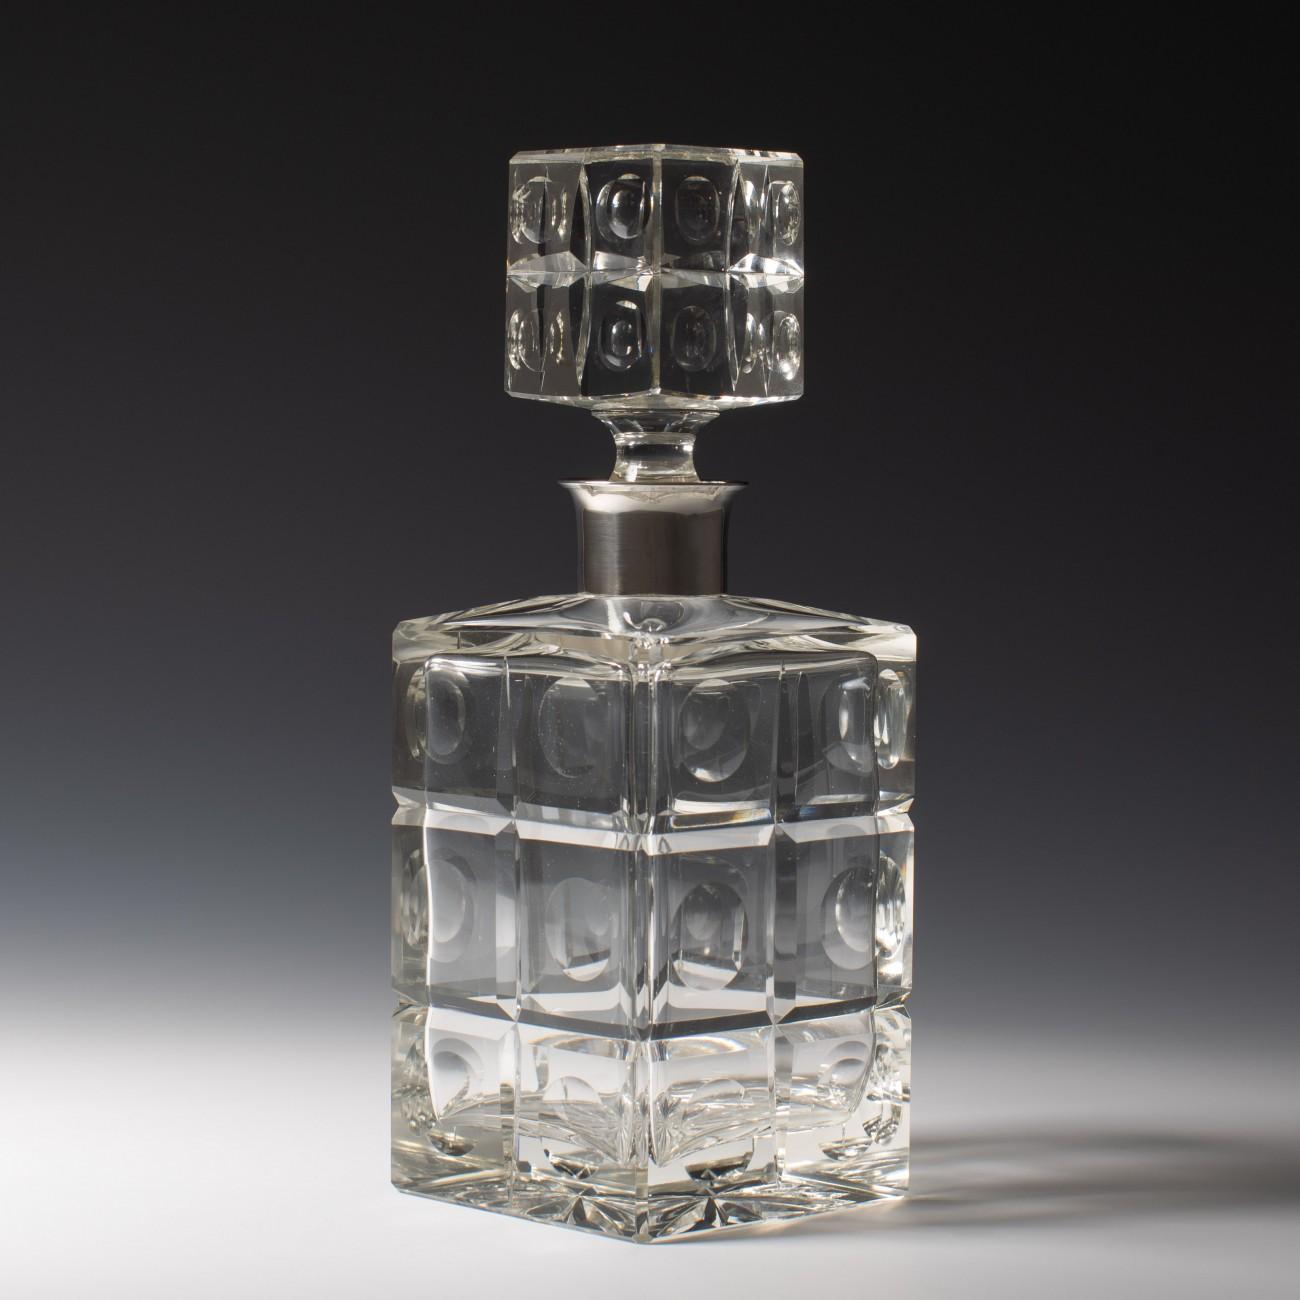 Stylishly crafted in heavy cut glass with sterling silver collars and cut glass stoppers. One hallmarked London, 1974, the other hallmarked London, 1977. With maker's marks for Israel Freeman & Son, and Garrard and Co.

Dimensions: 25 cm/9¾ inches